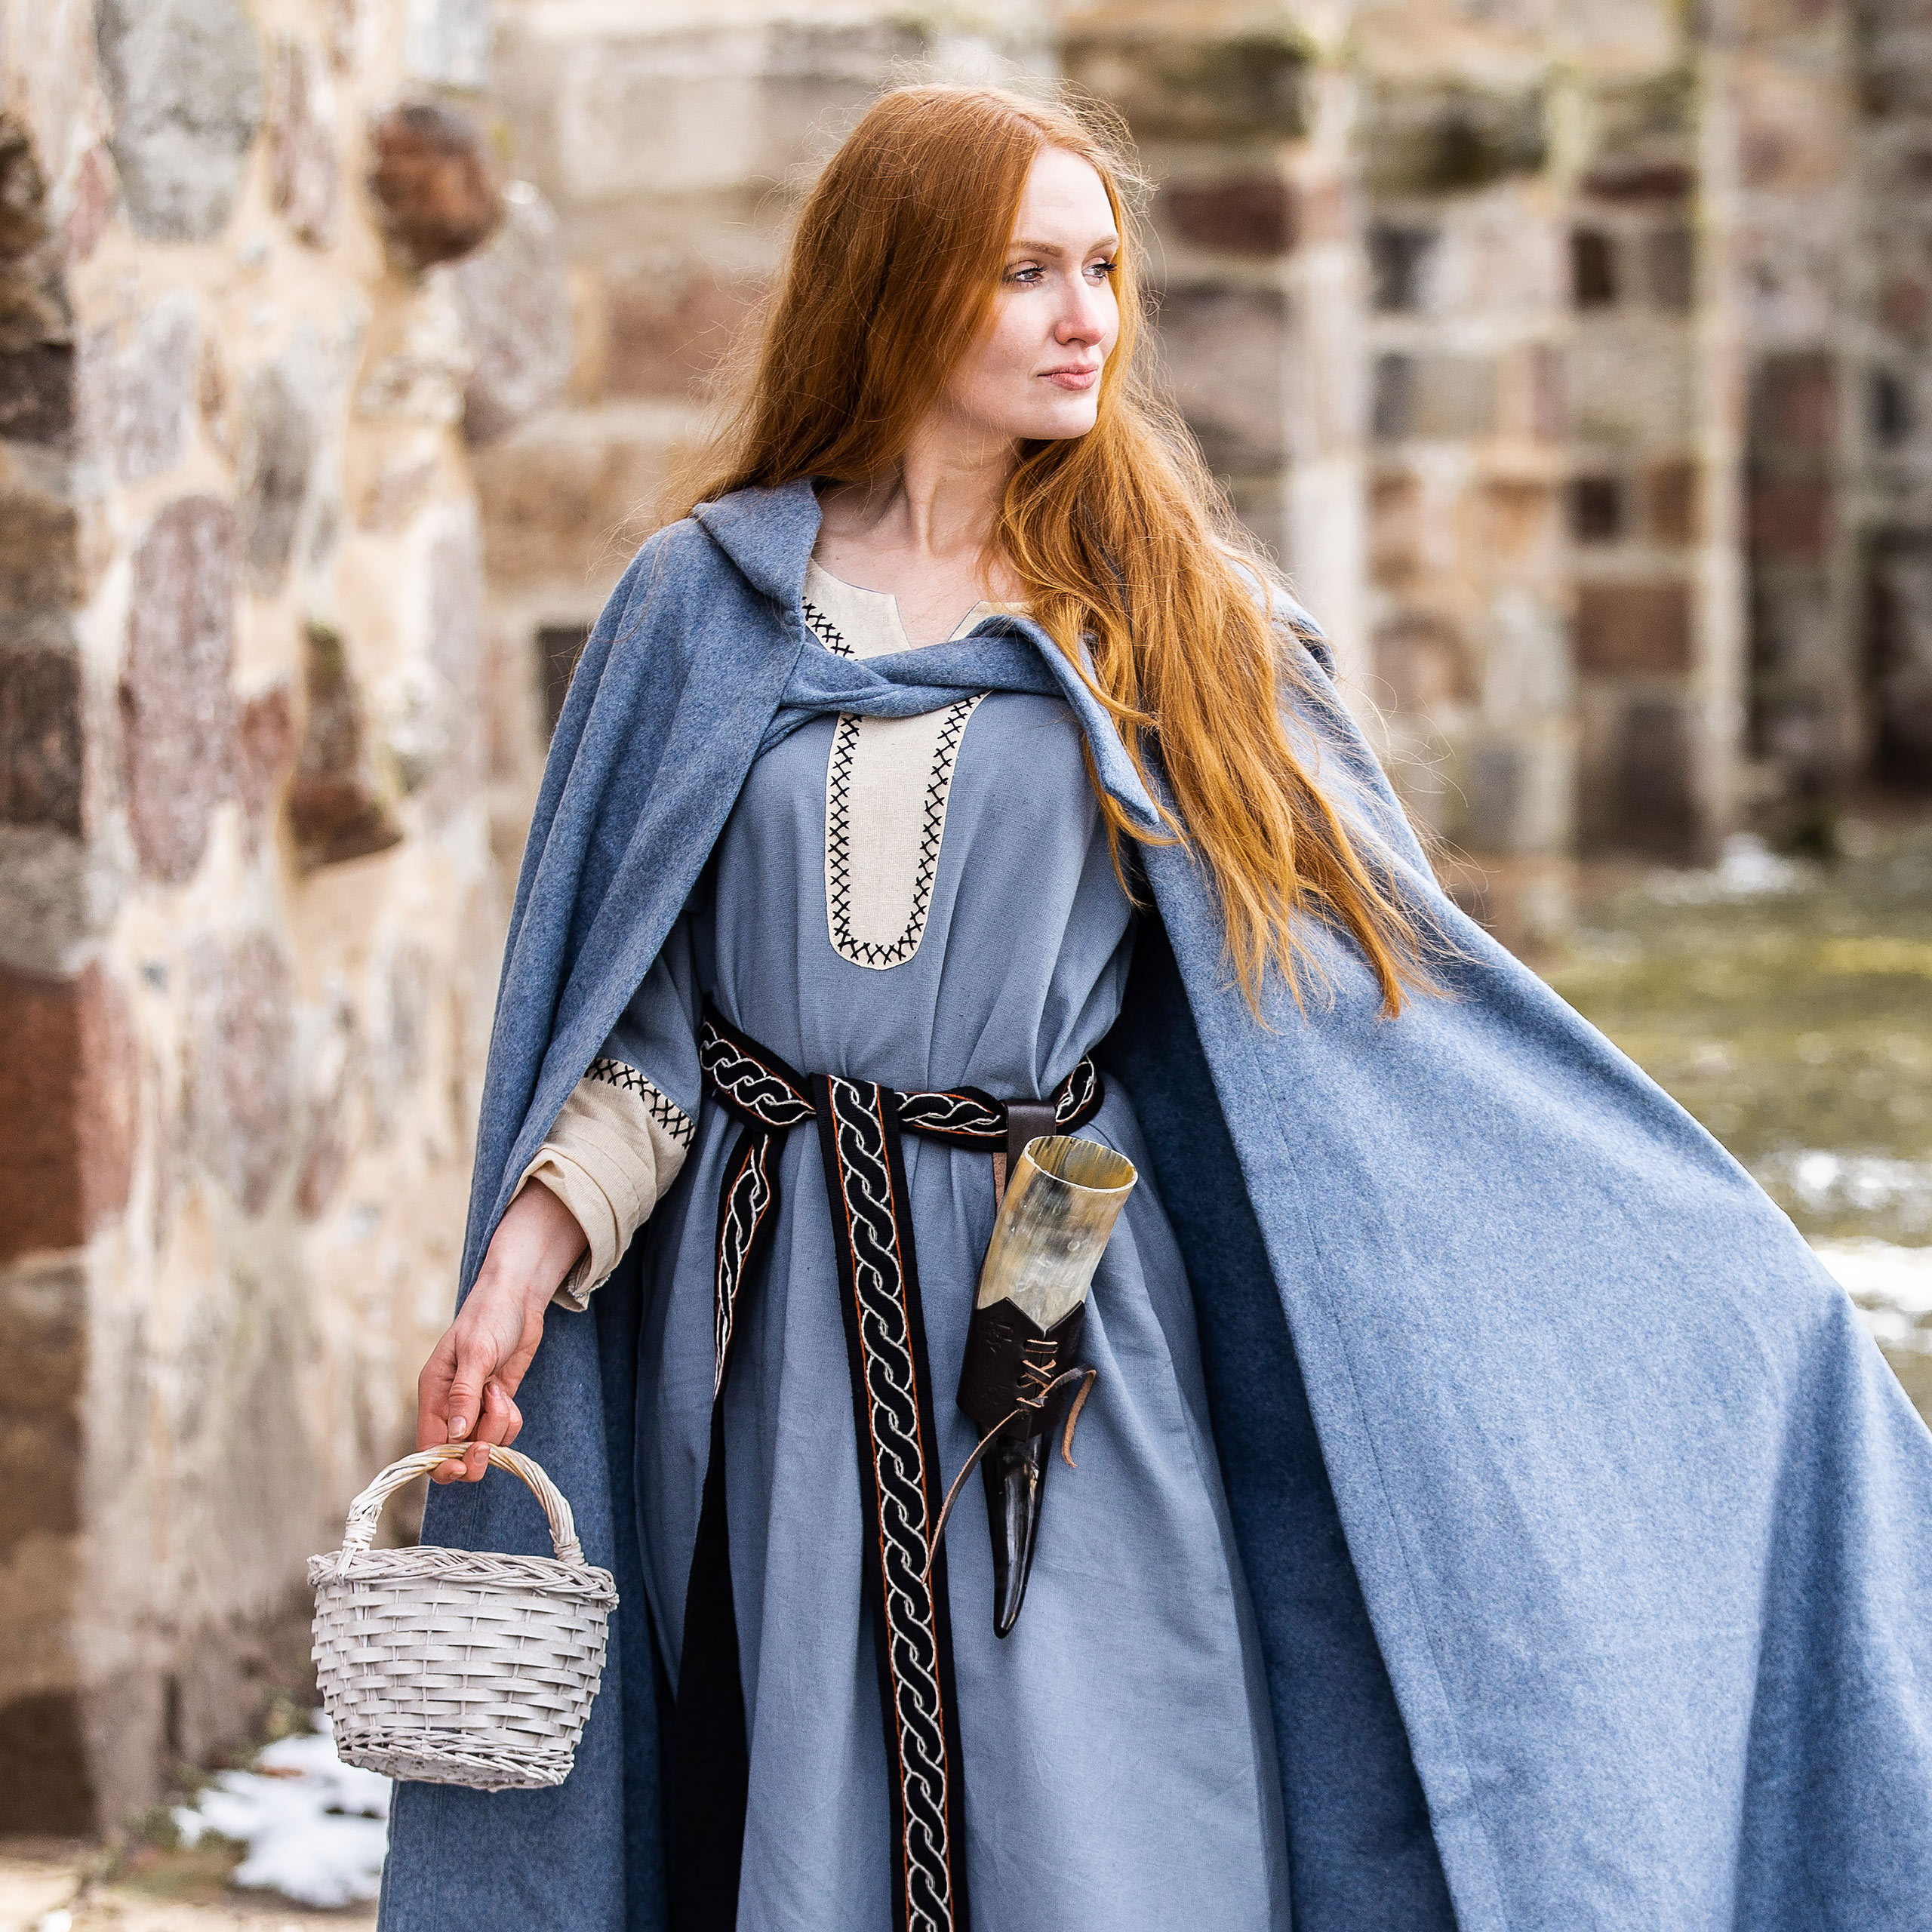 Medieval dress with hand embroidery blue